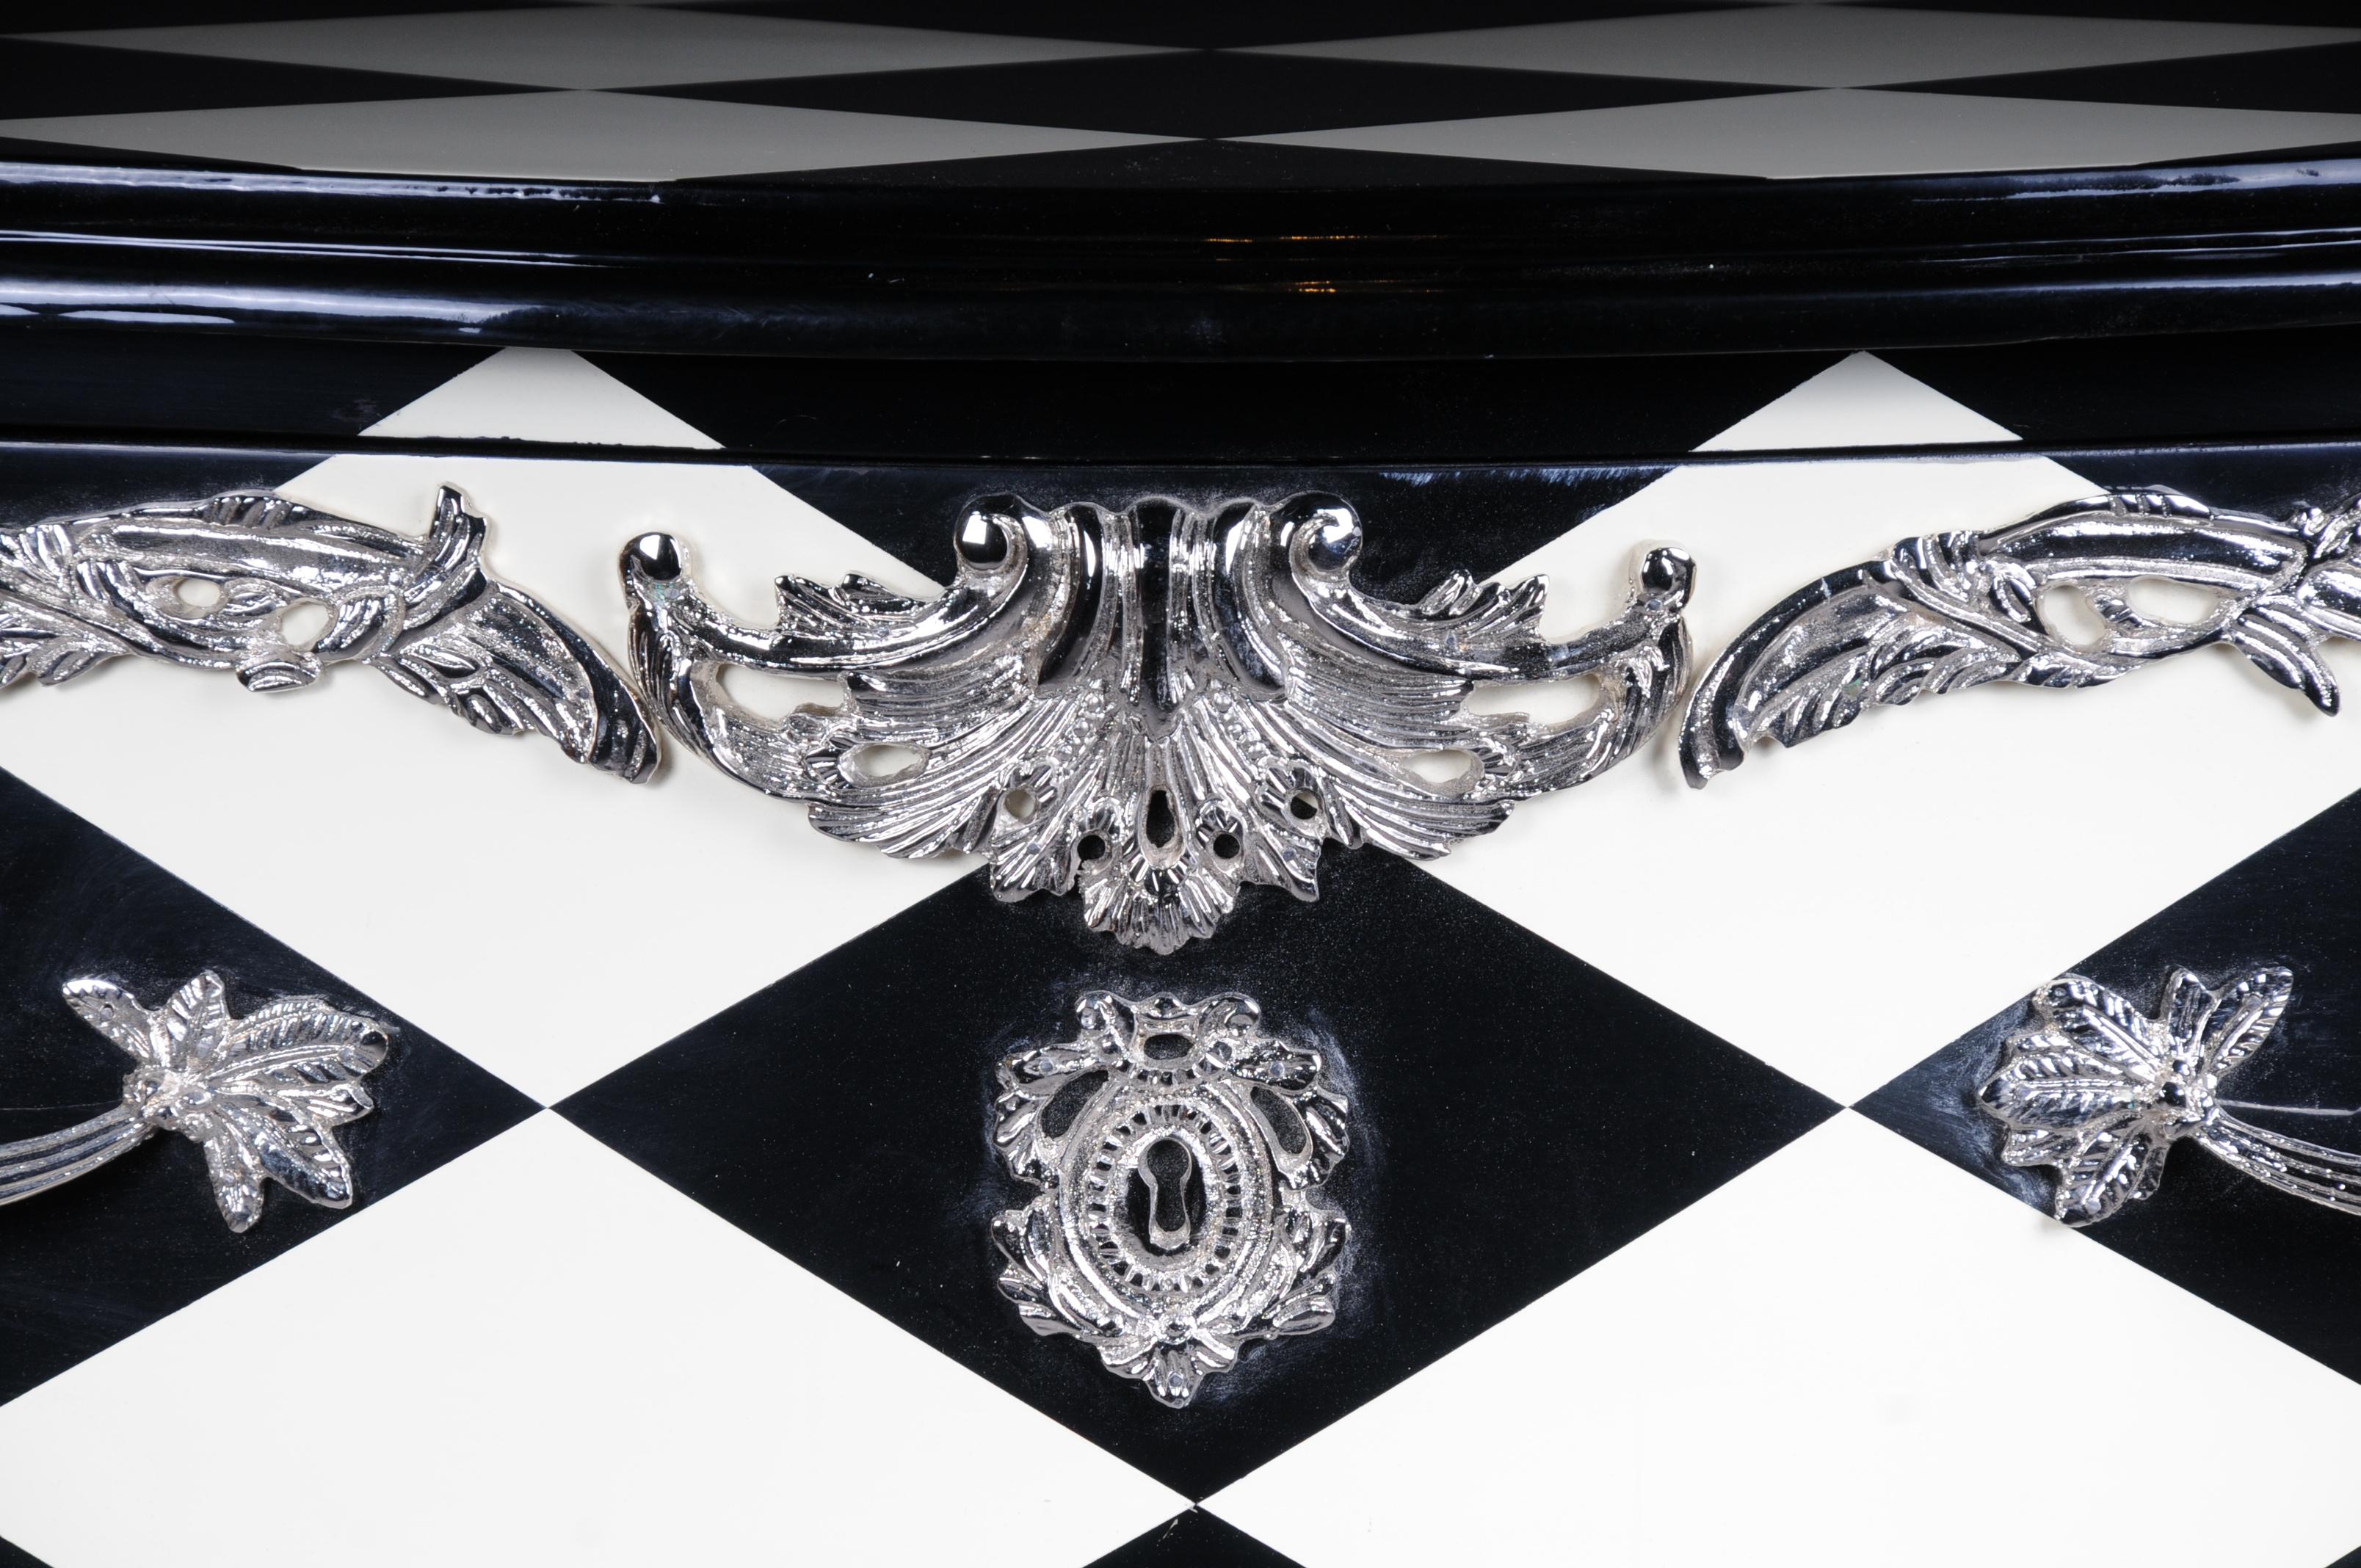 Designer Commode in Louis XV, chessboard pattern.

Solid wood on all sides and black and white painted chess tiles on the top. Slightly cambered body with extended corner strakes on a deeply lowered frame, ending over high curly legs in bronze